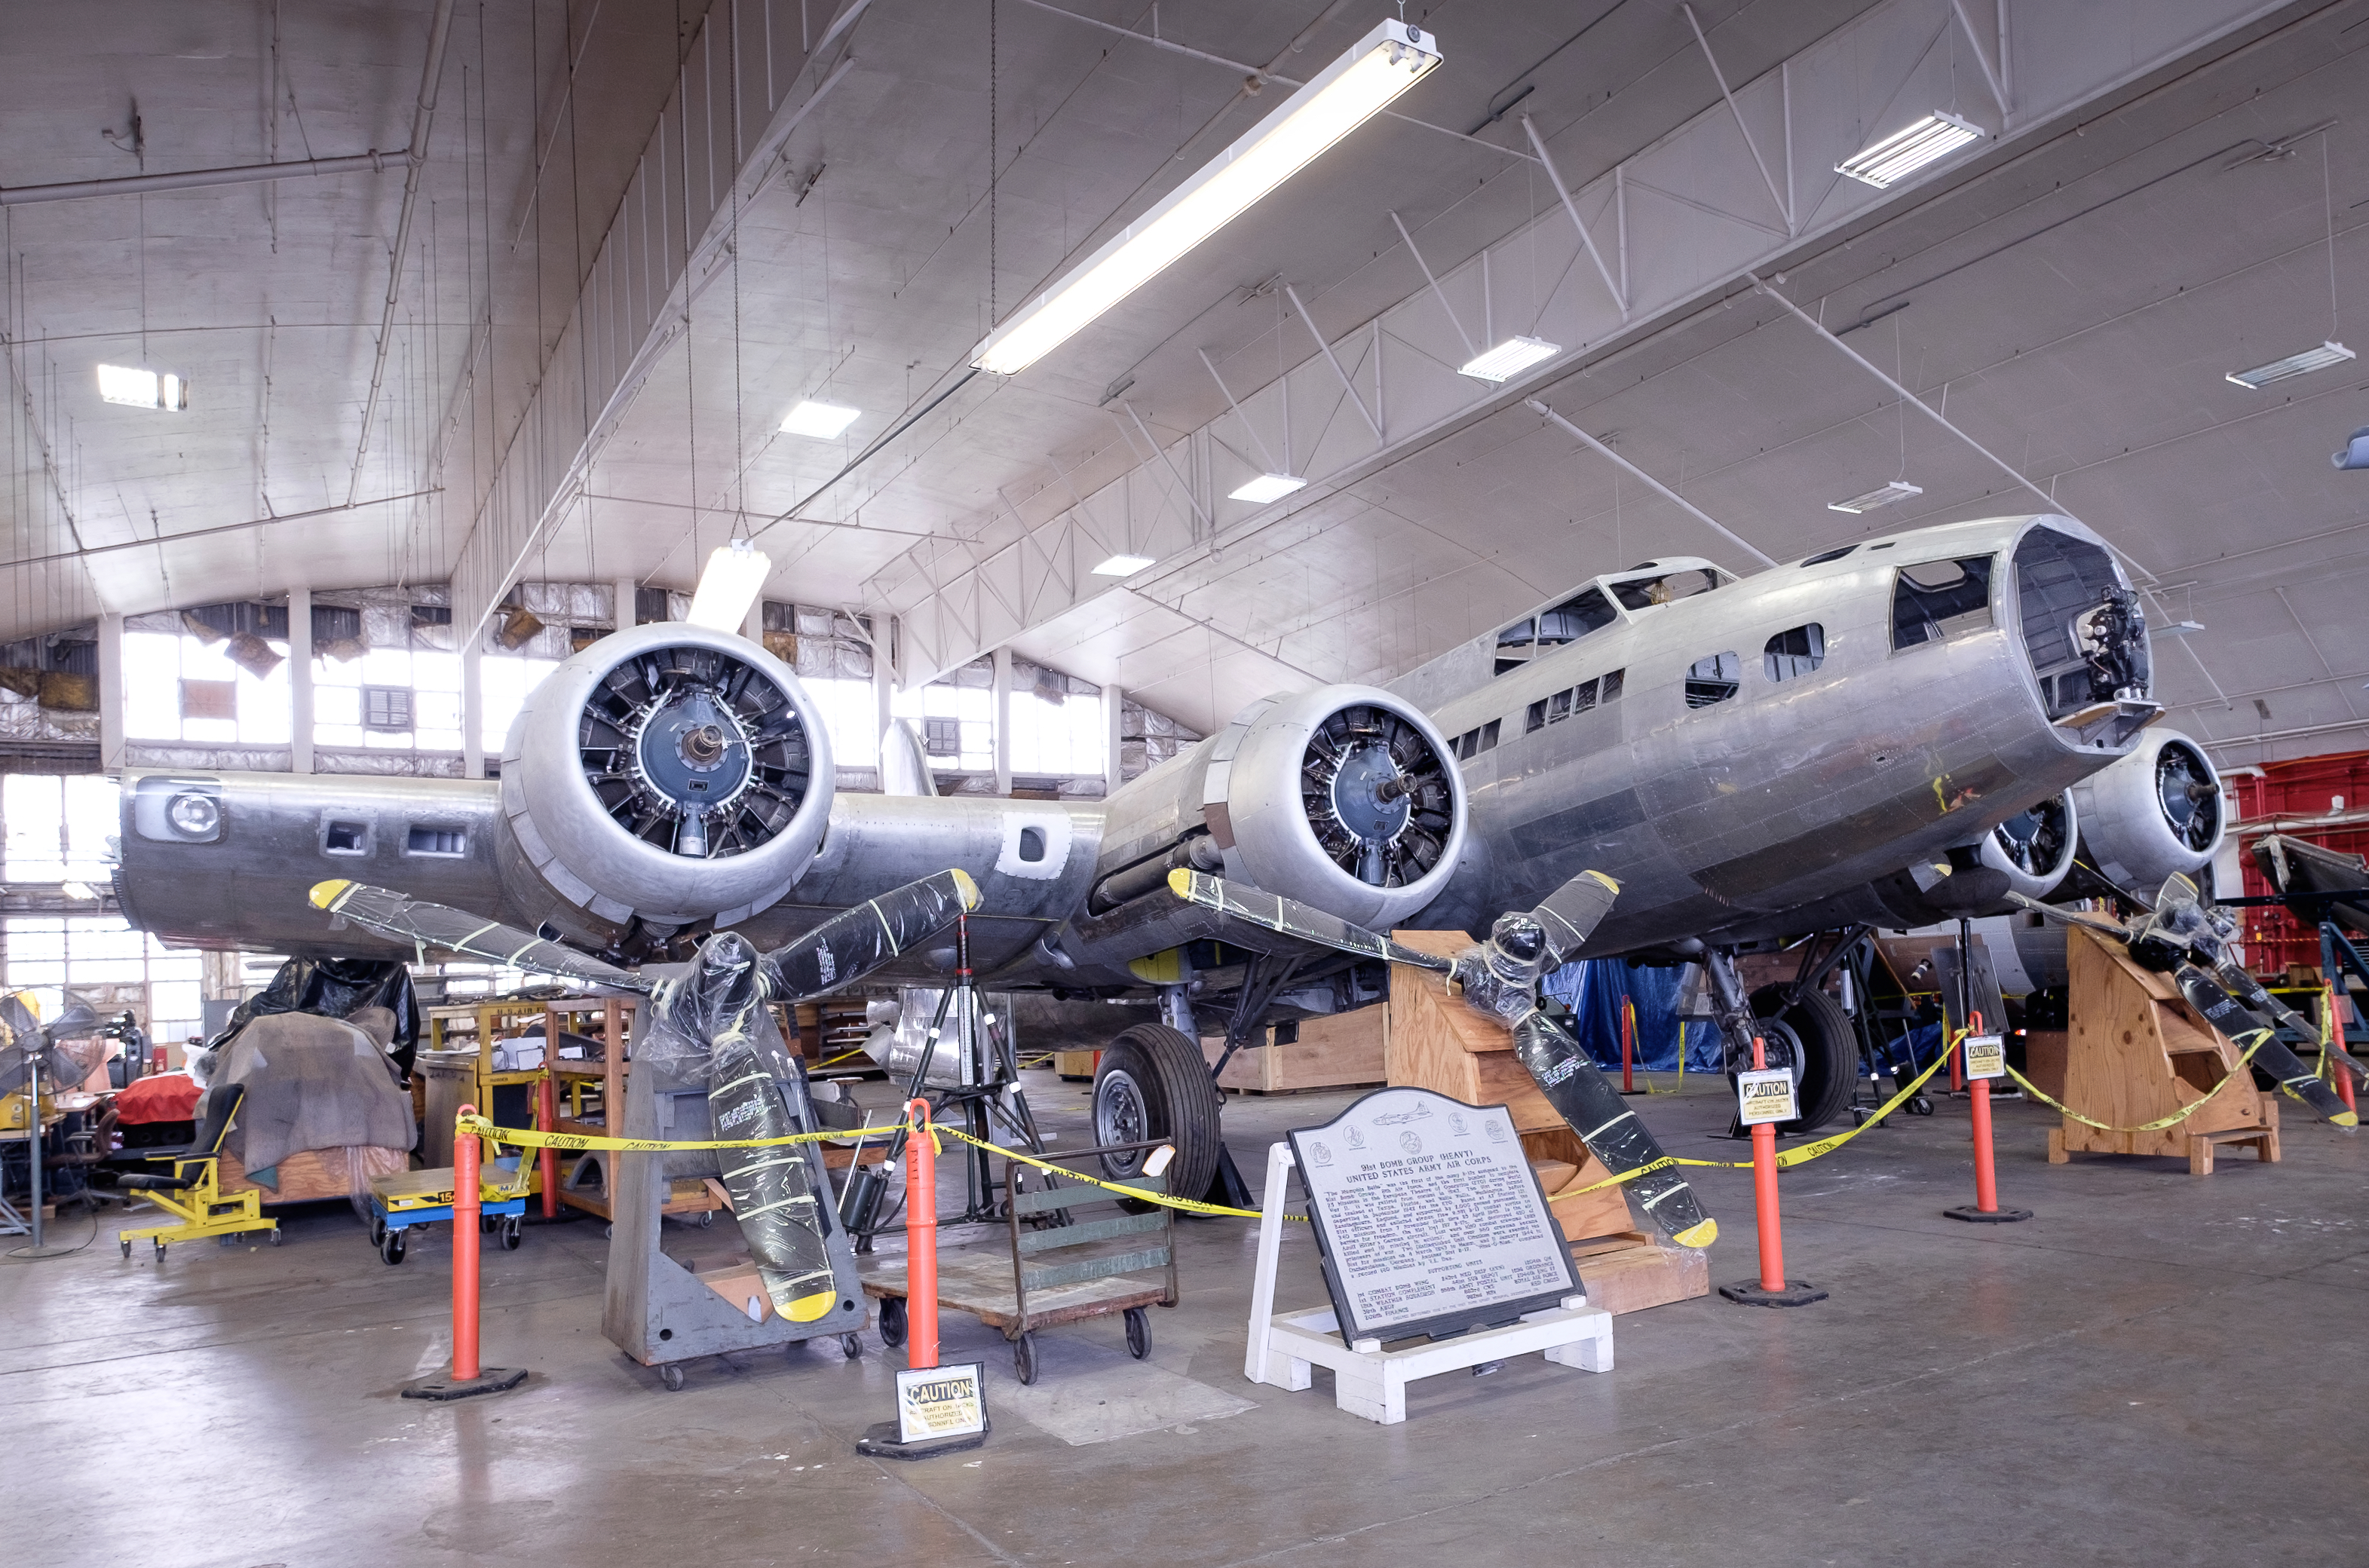 Memphis Belle B-17F airframe in restoraton hangar at Wright-Patterson Air Force Base, Ohio, USA